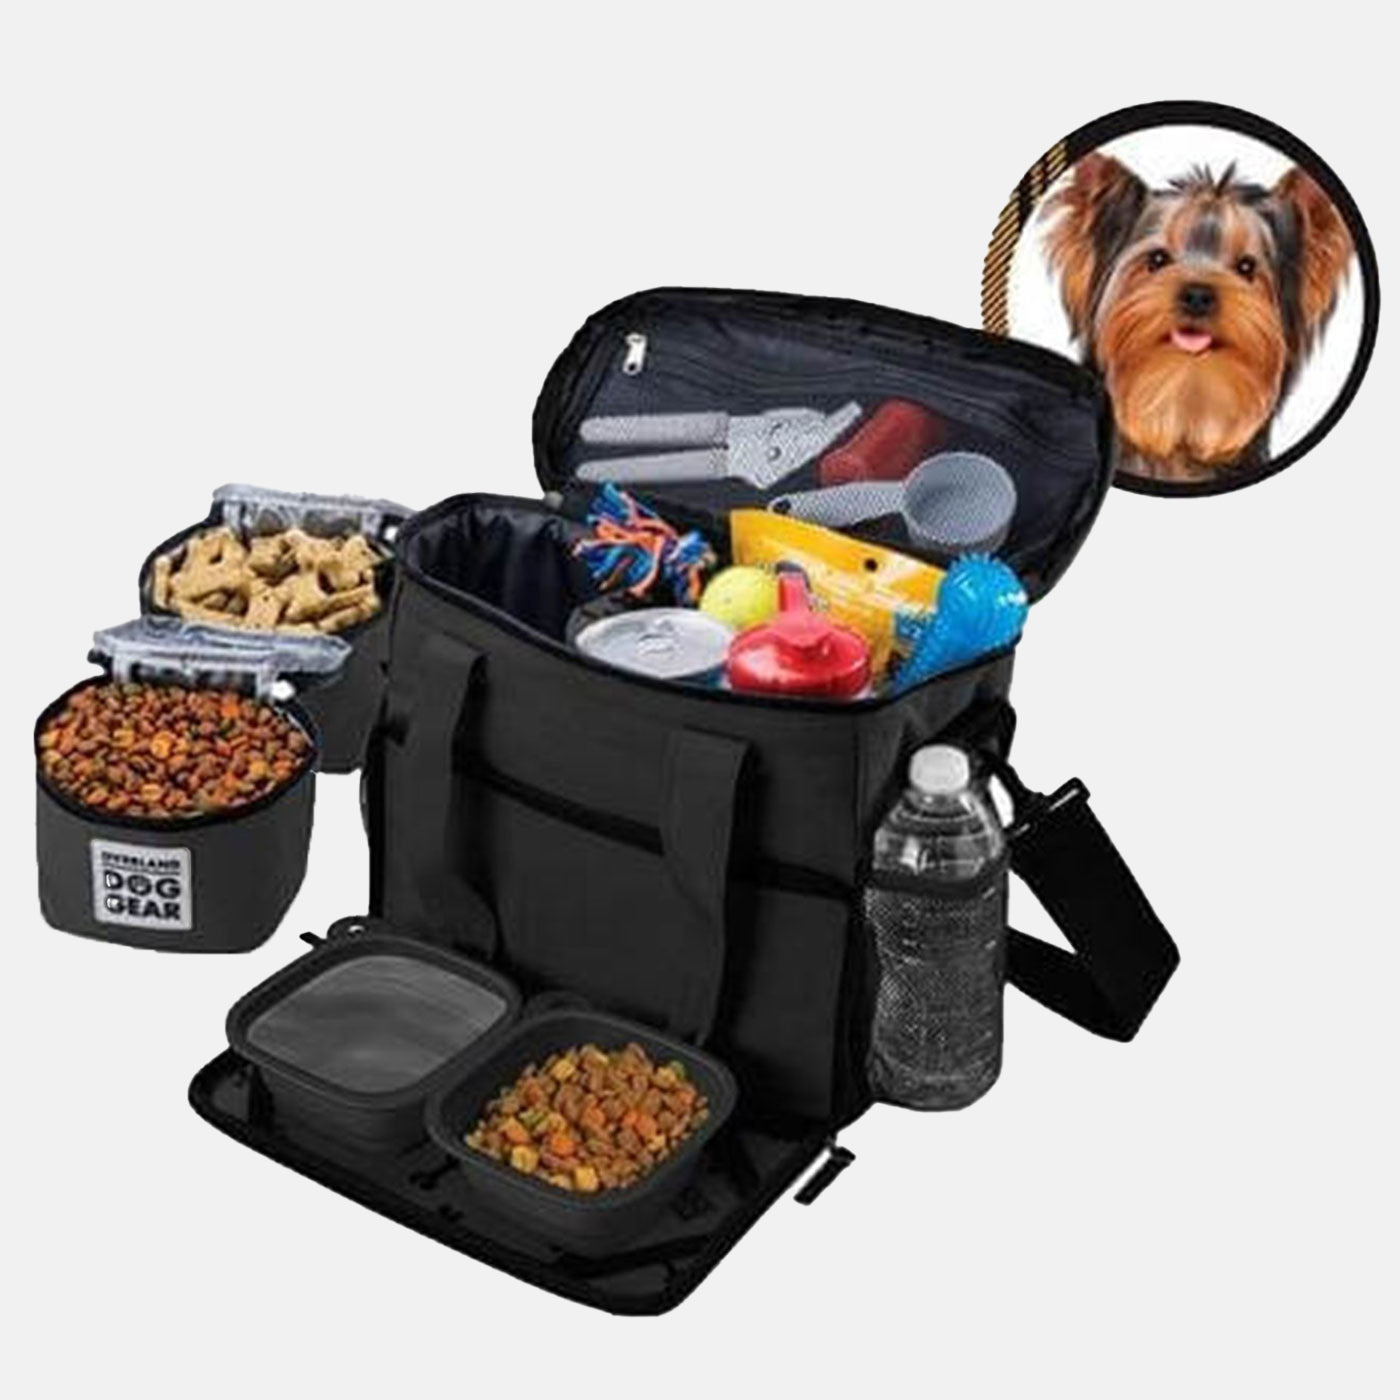 Discover, Mobile Dog Gear Week Away Bag, in Black. The Perfect Away Bag for any Pet Parent, Featuring dividers to stack food and built in waste bag dispenser. Also Included feeding set, collapsible silicone bowls and placemat! The Perfect Gift For travel, meets airline requirements. Available Now at Lords & Labradors